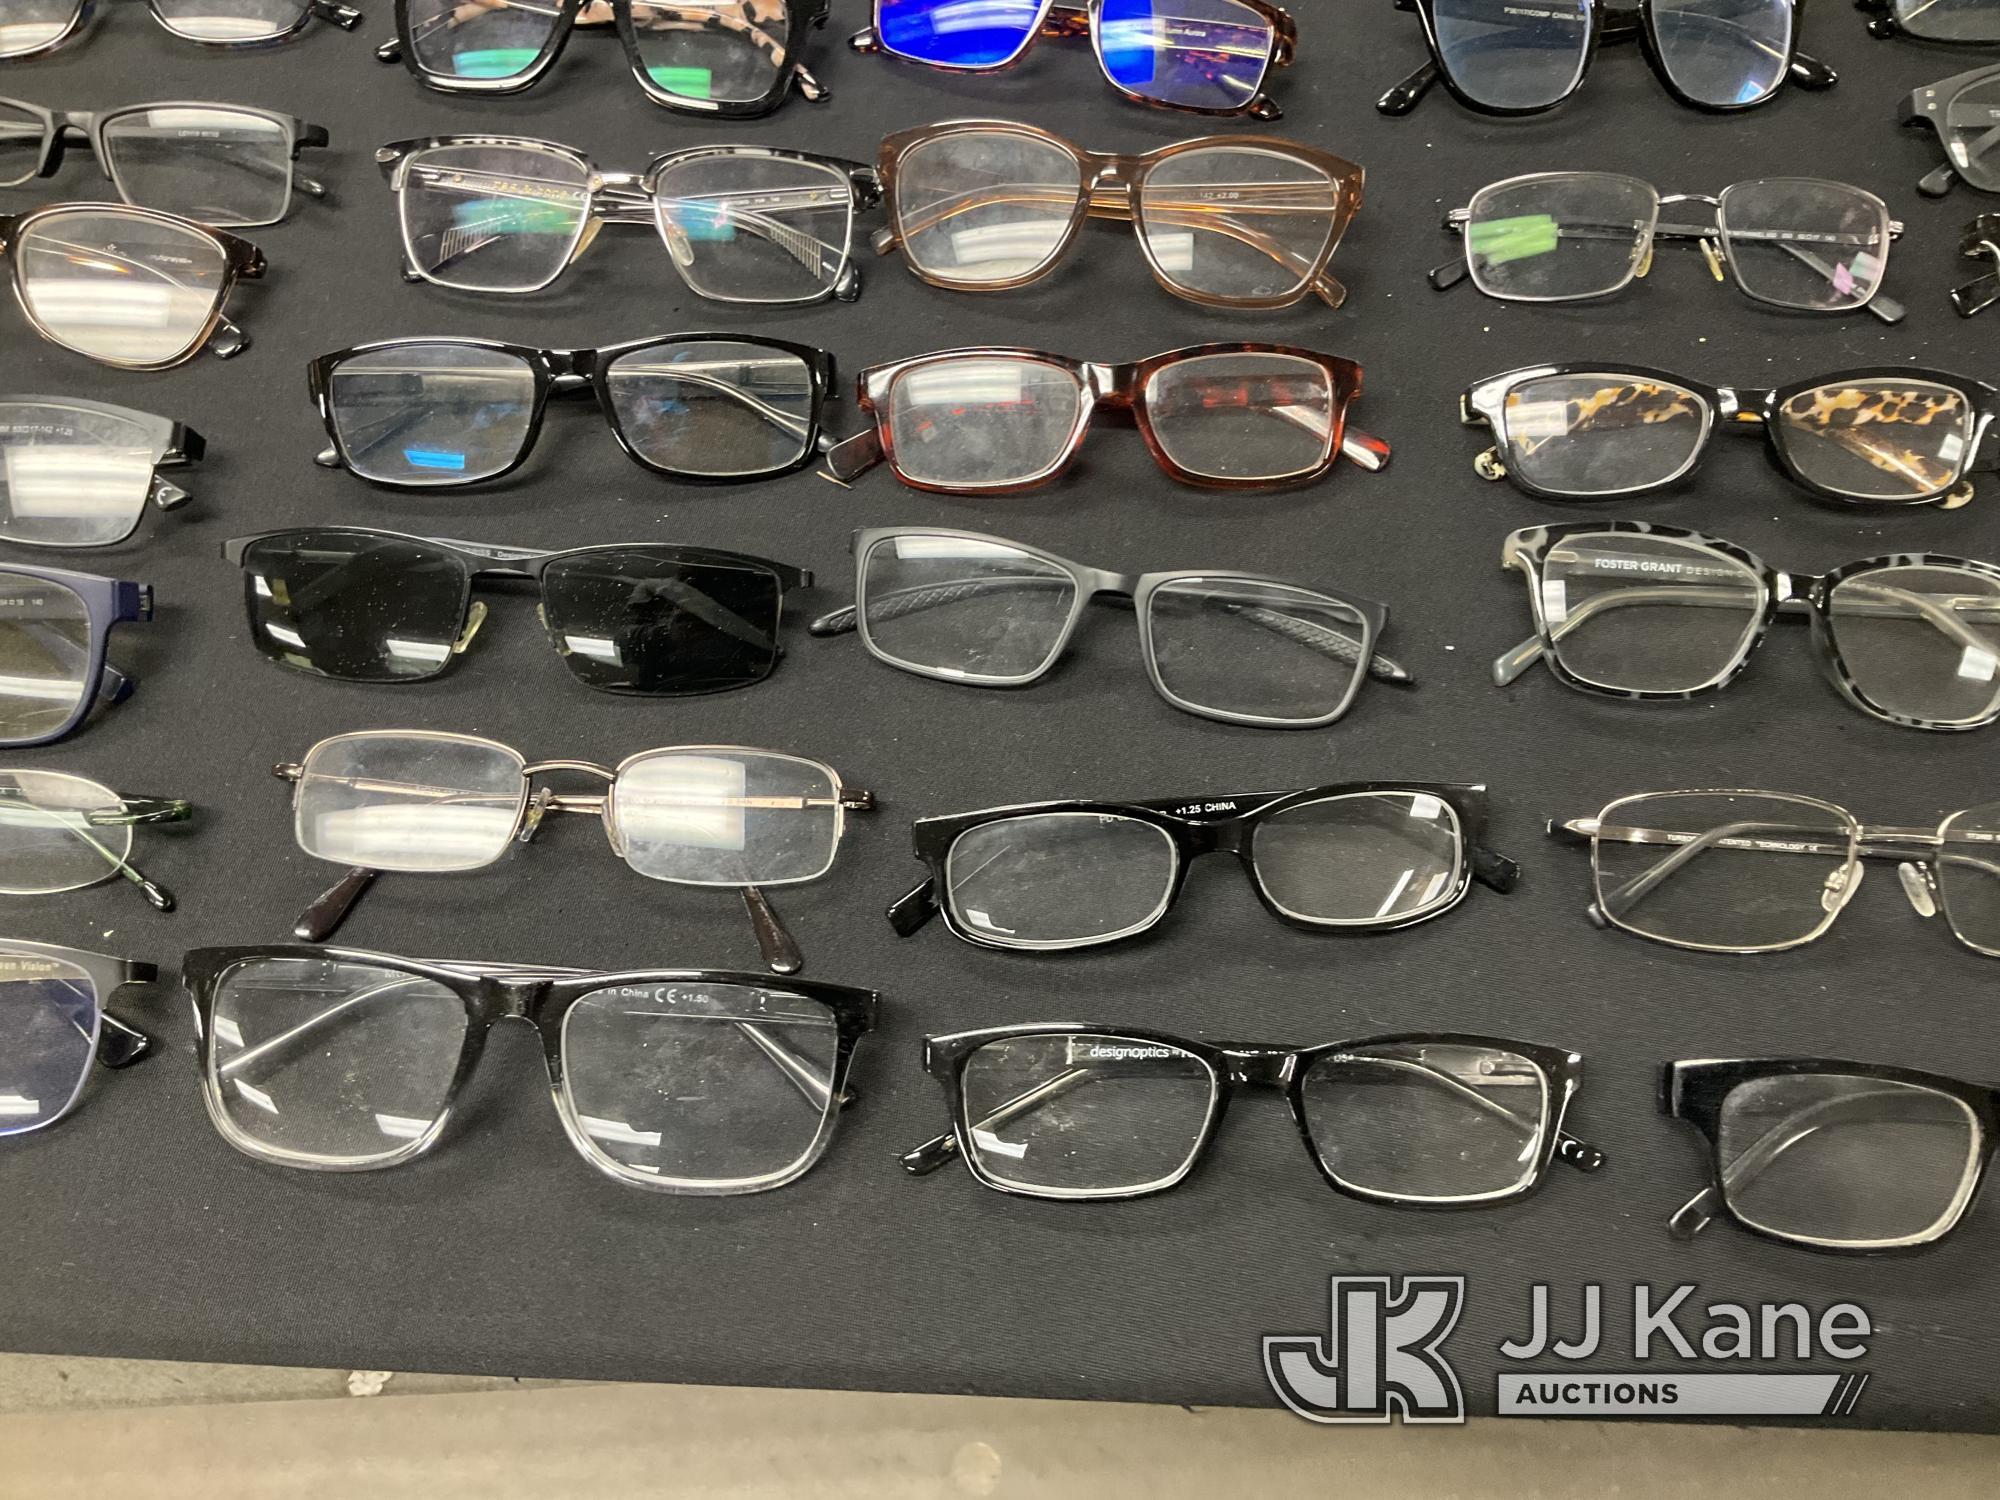 (Jurupa Valley, CA) Eye Glasses (Used) NOTE: This unit is being sold AS IS/WHERE IS via Timed Auctio